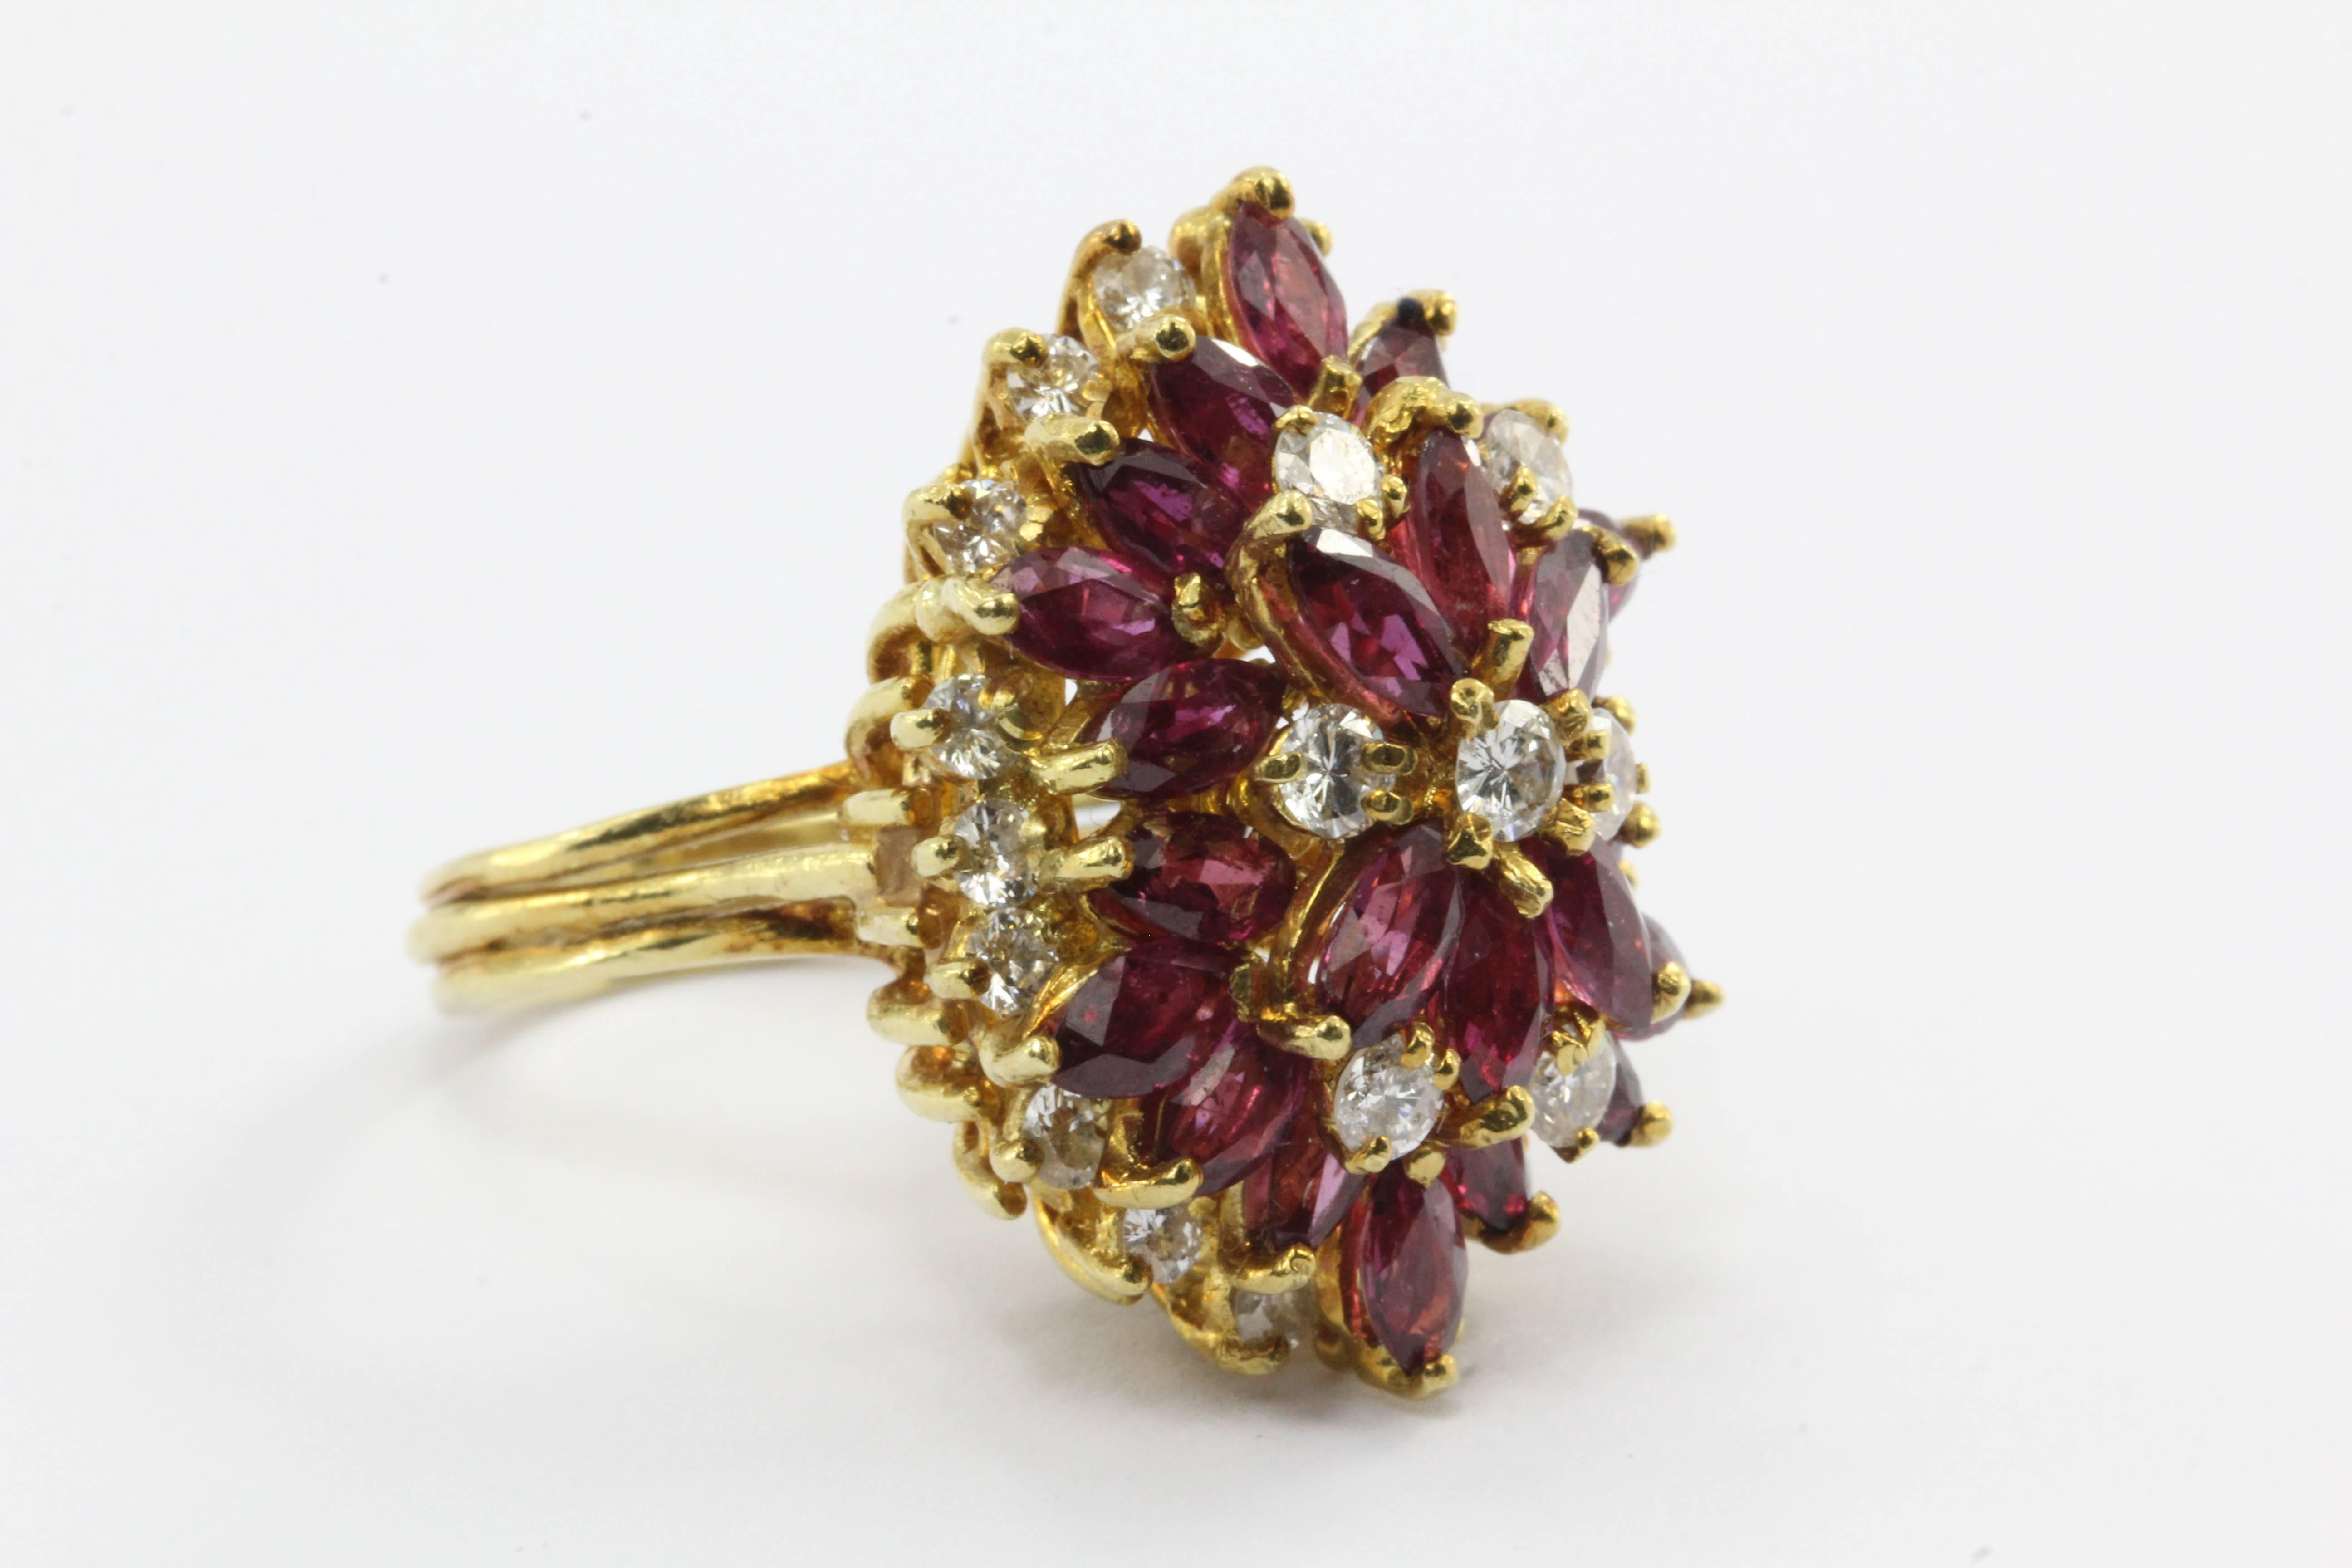 An exquisite ruby and diamond cocktail ring.

The rubies are all natural wonderfully cut marquise shape and equal a total of 5 carats

The diamonds are round brilliant G/H color and Si1 clarity.  There is approximately 1 carat of diamonds.

In